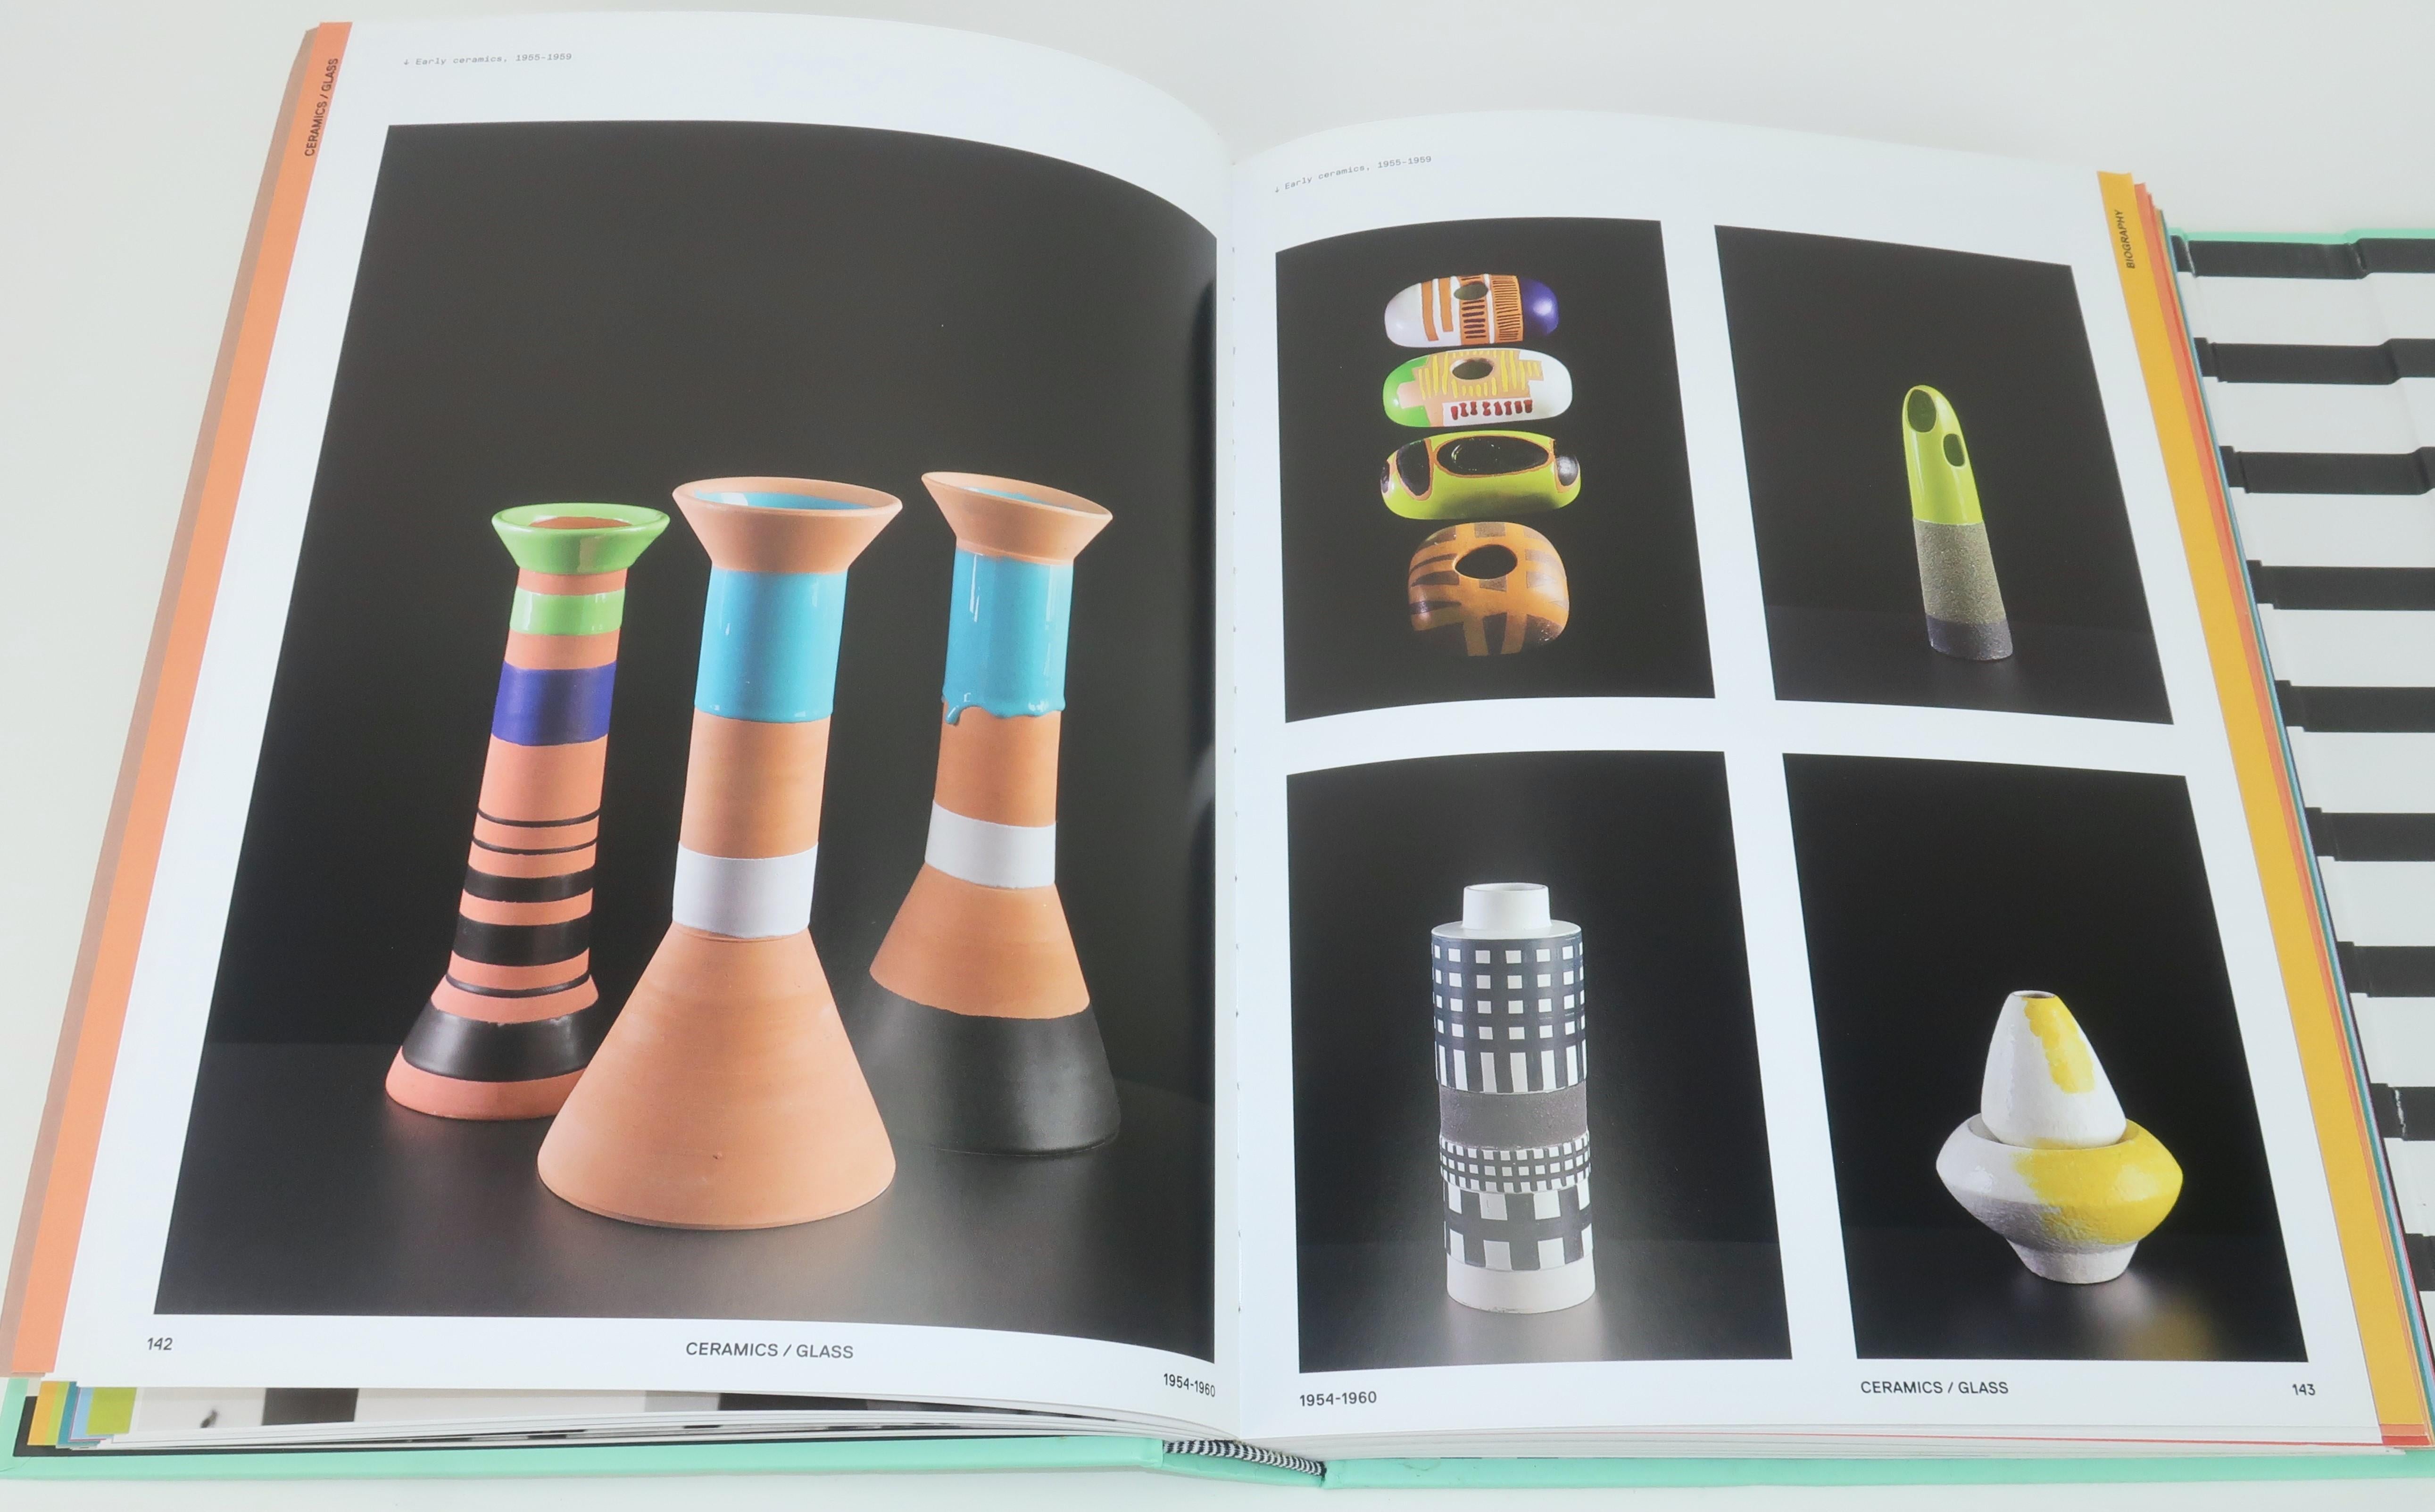 Sottsass Coffee Table Book Featuring Memphis Design, Phaidon, 2014 For Sale 3